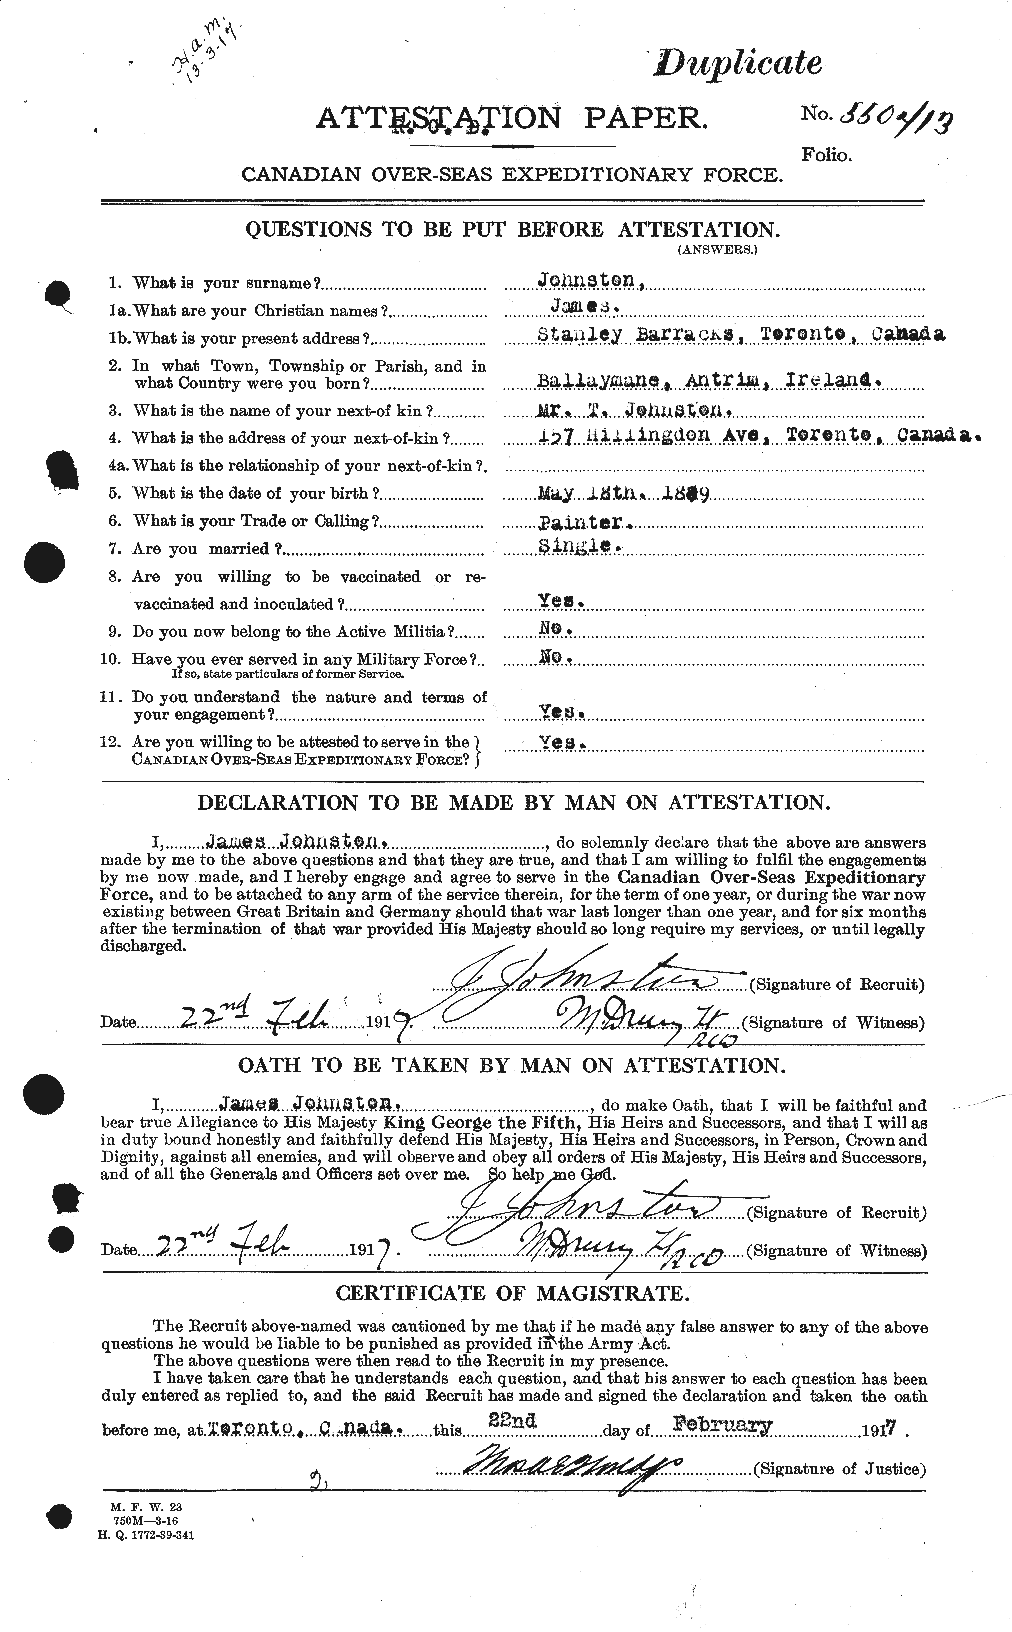 Personnel Records of the First World War - CEF 422689a